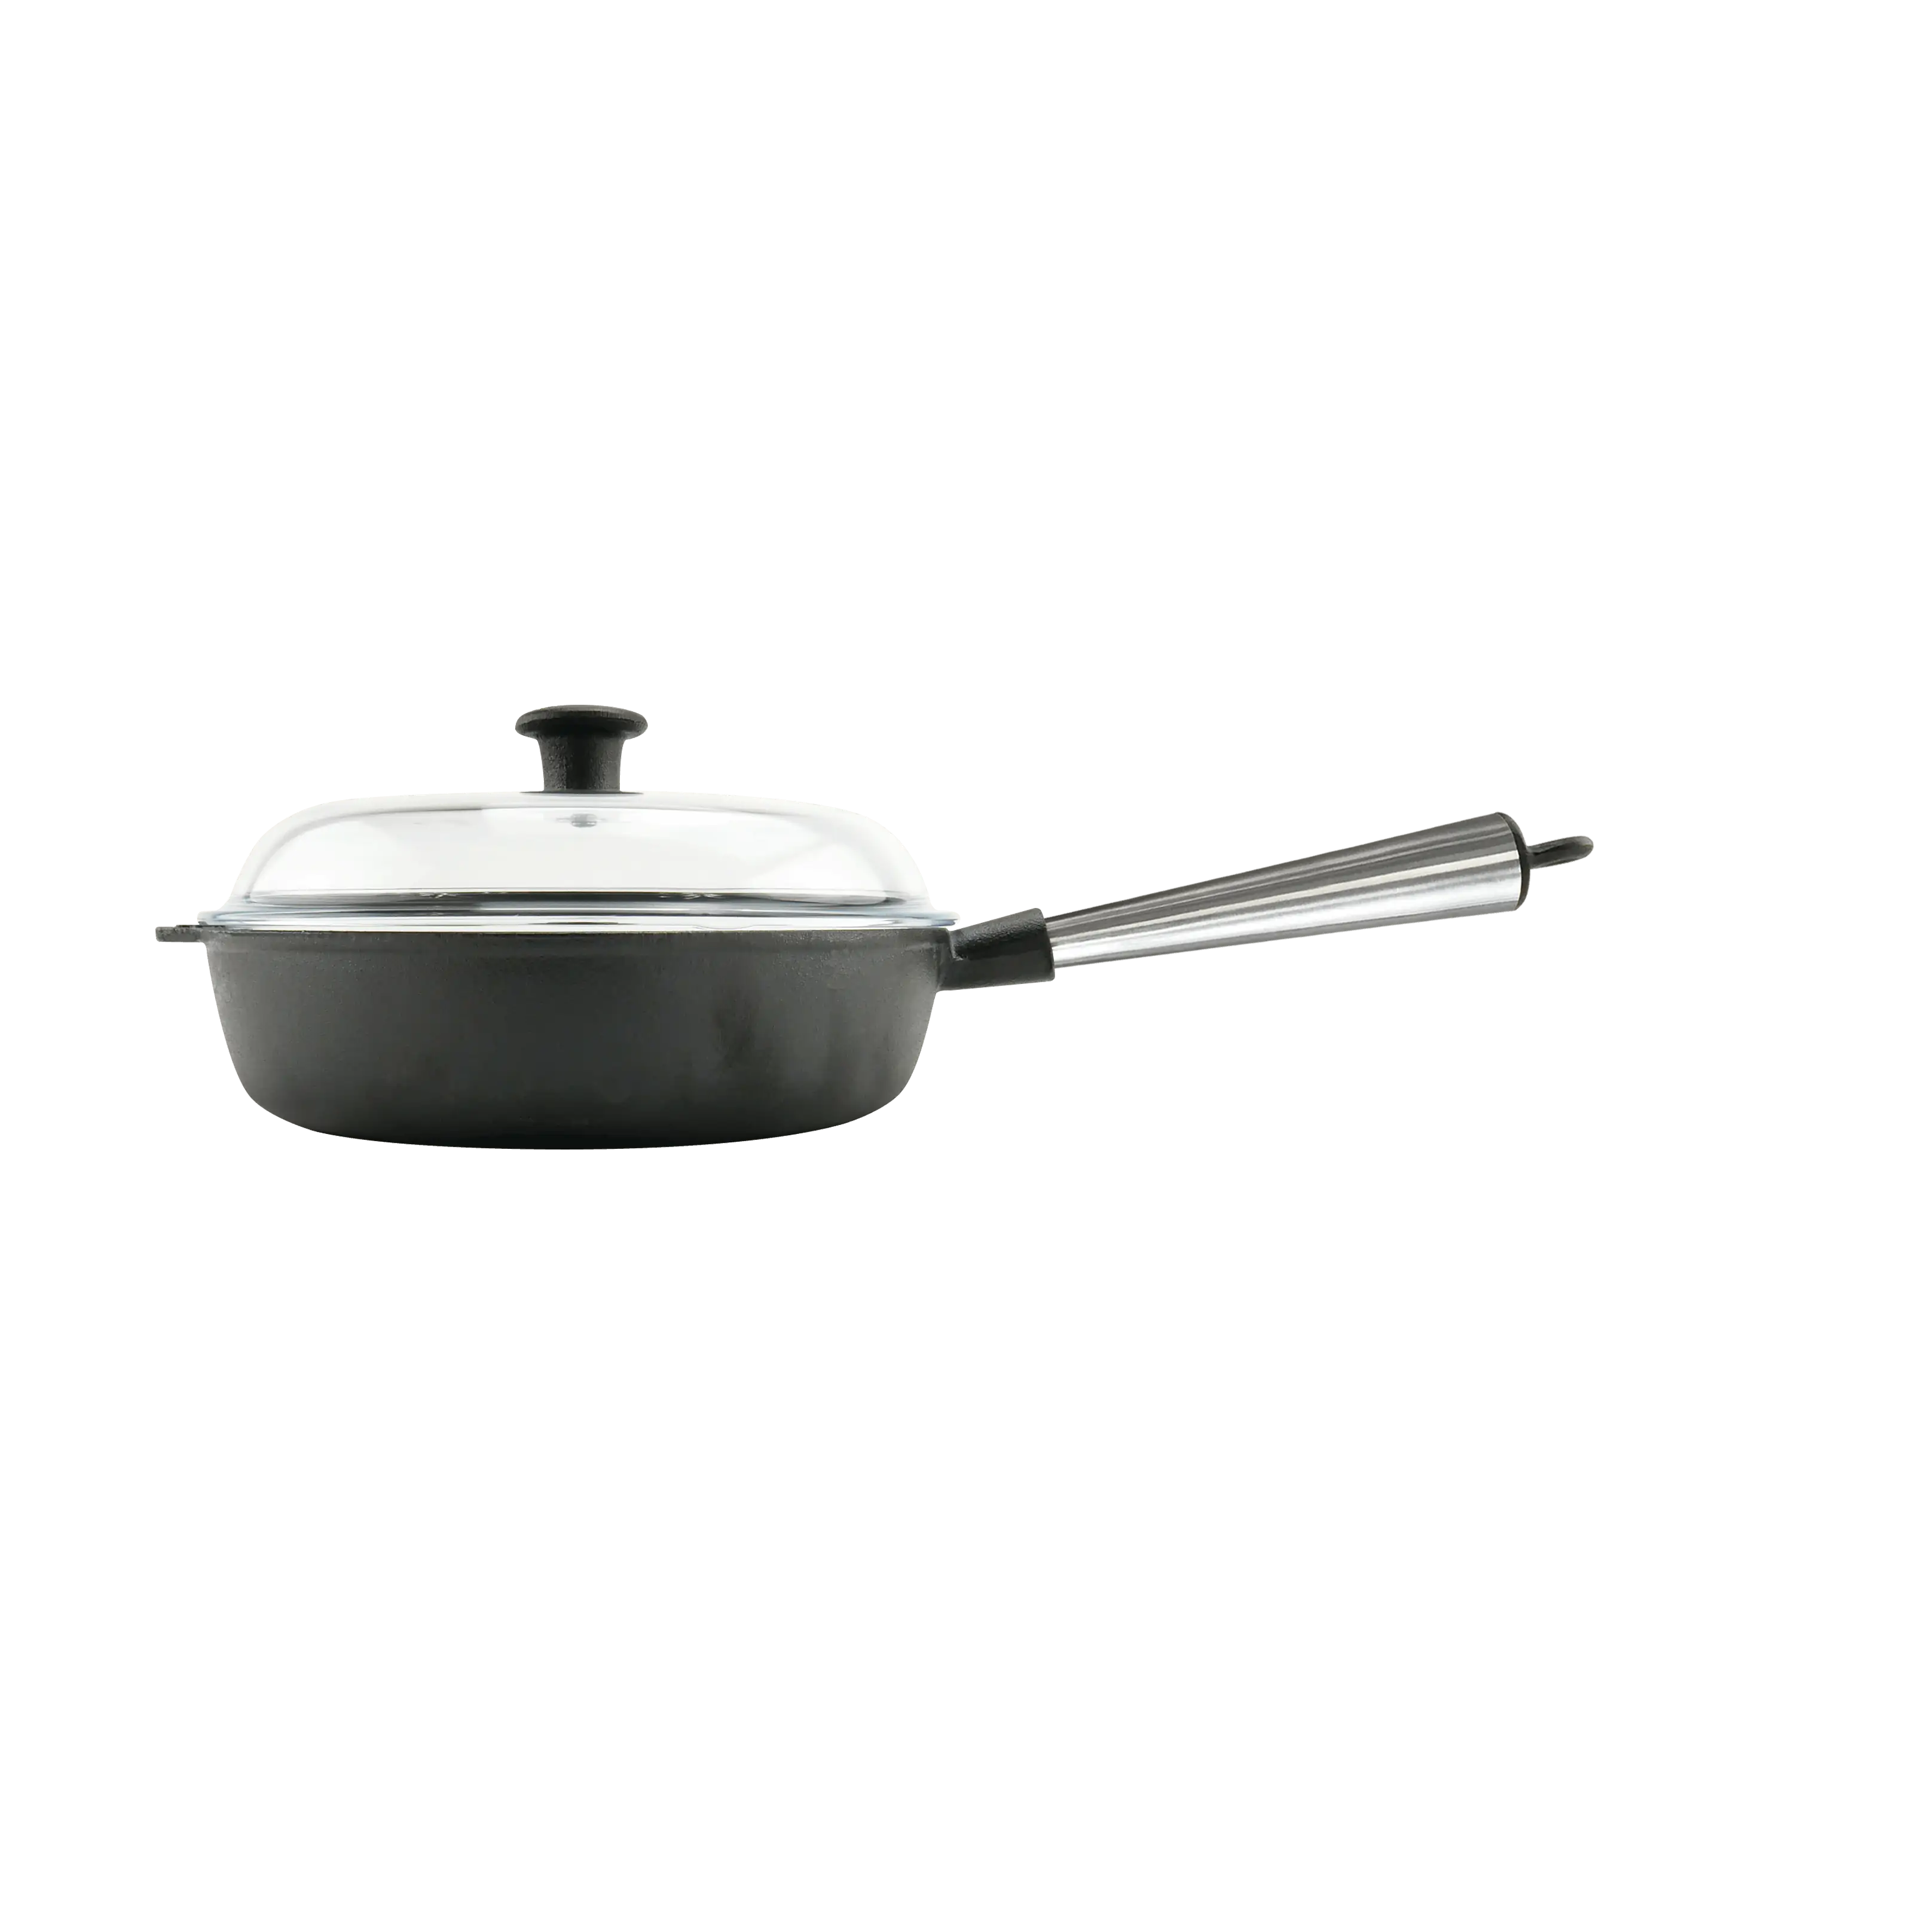 Cast Iron Saute Pan 25cm Stainless Steel Handle with Glas Lid